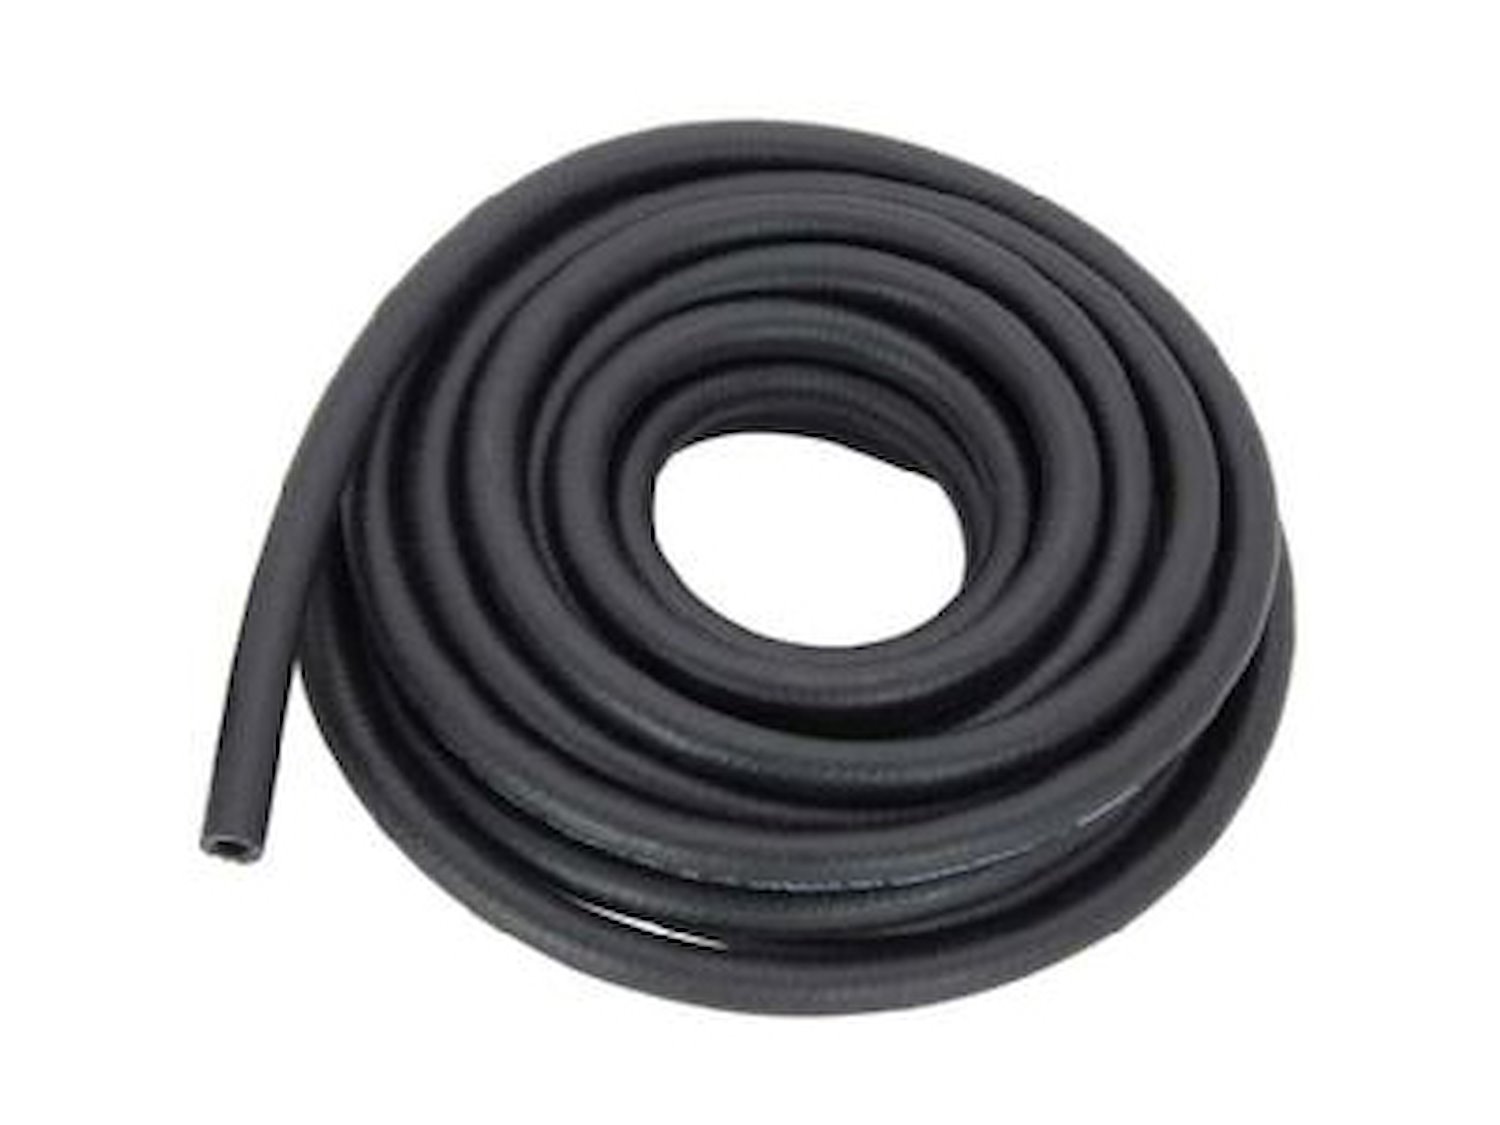 Universal Fuel Hose [5/16 in. I.D. x 25 ft.]